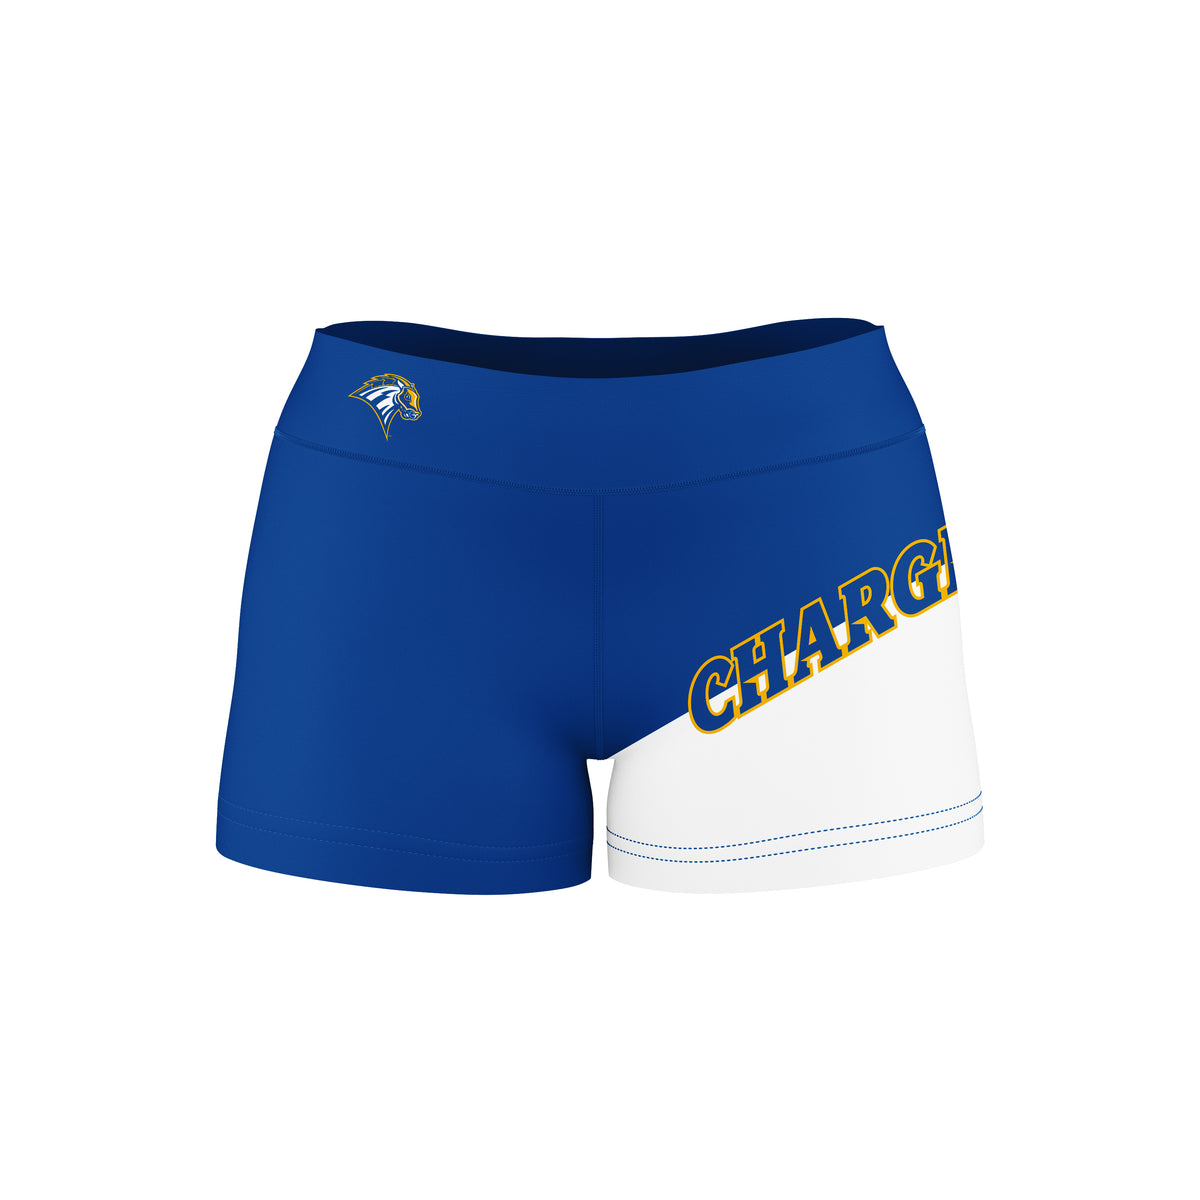 women's chargers gear